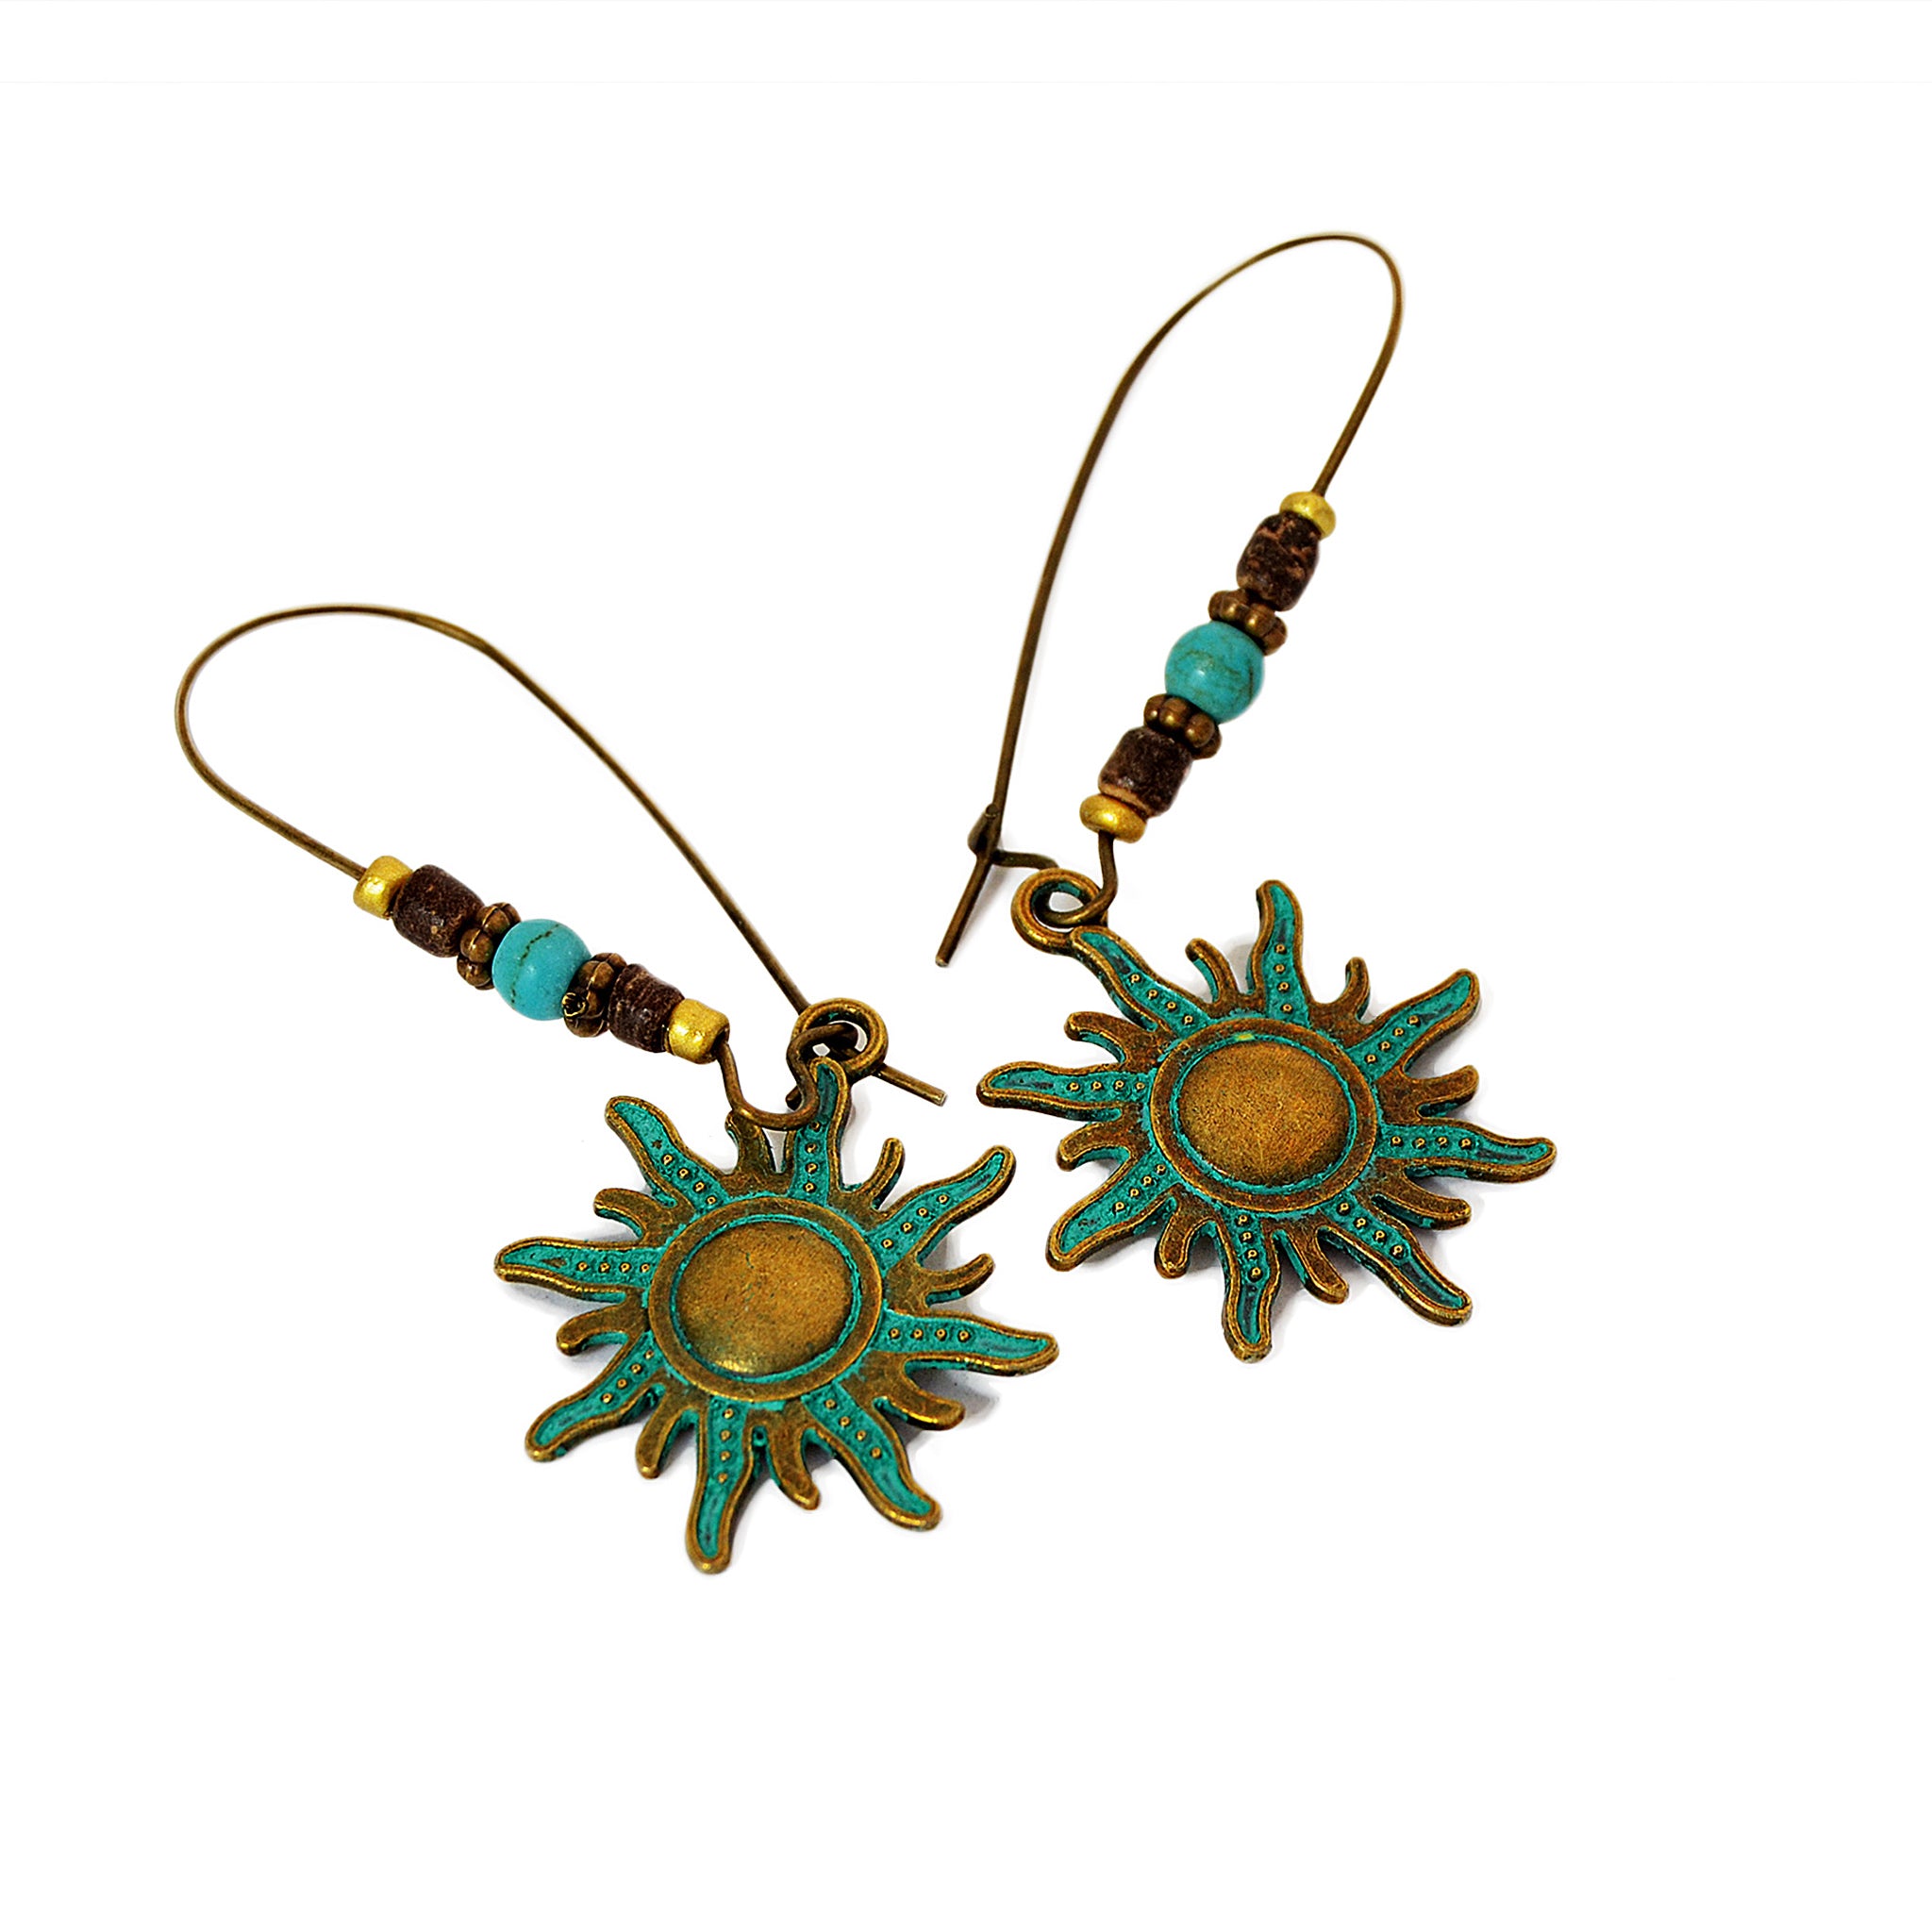 Sun hook earrings with old blue patina on brass